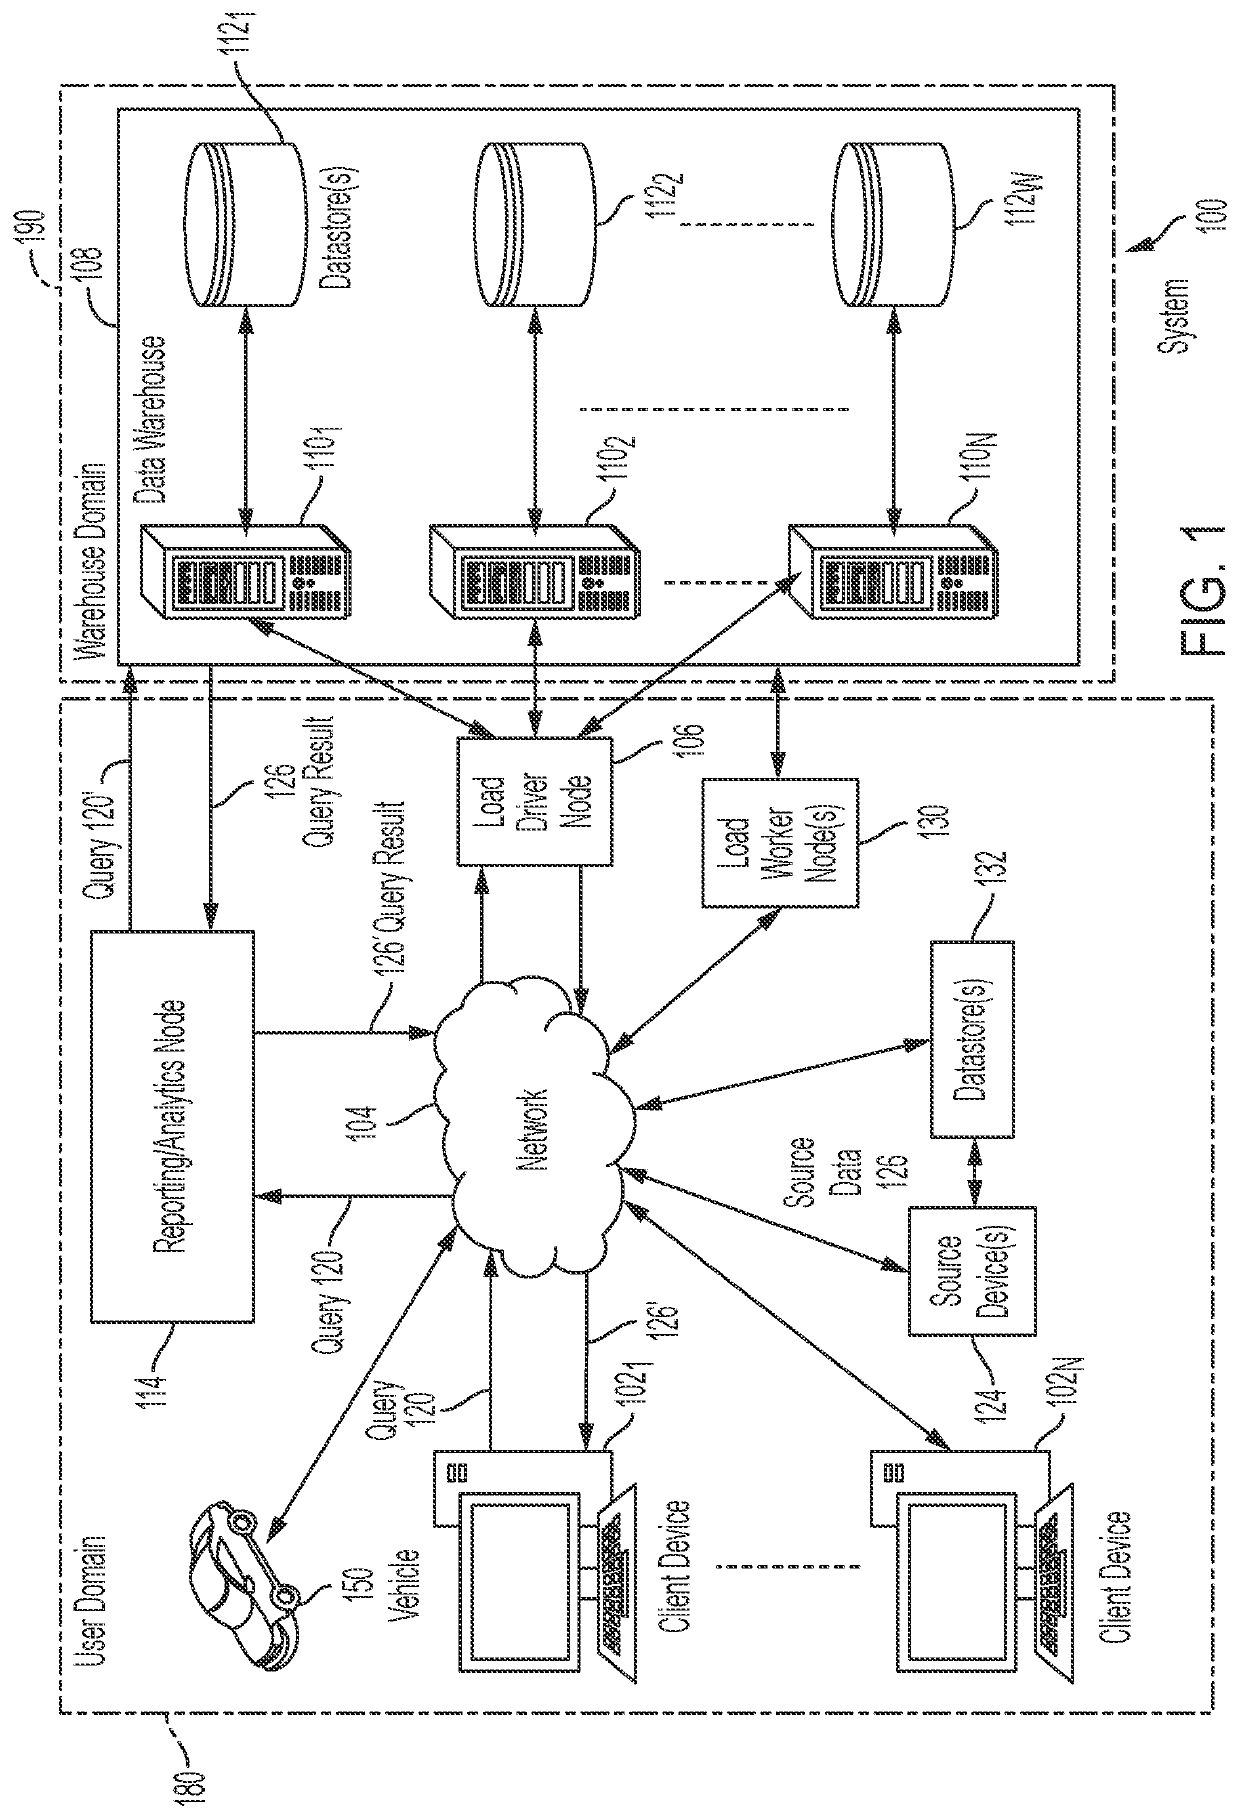 Systems and methods for atomic publication of distributed writes to a distributed data warehouse